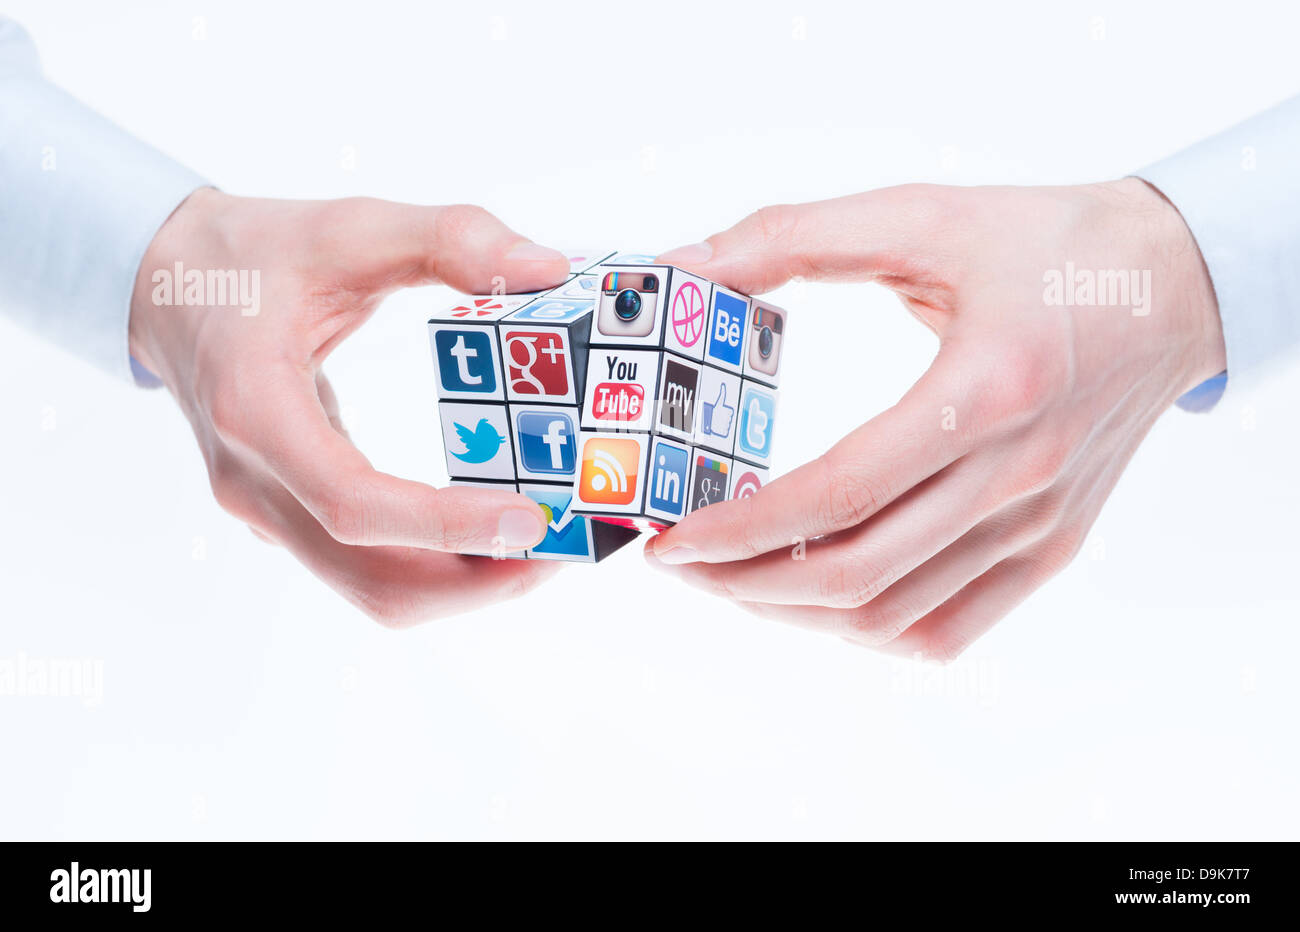 A hands holding rubiks cube with logotypes of well-known social media brands. Stock Photo